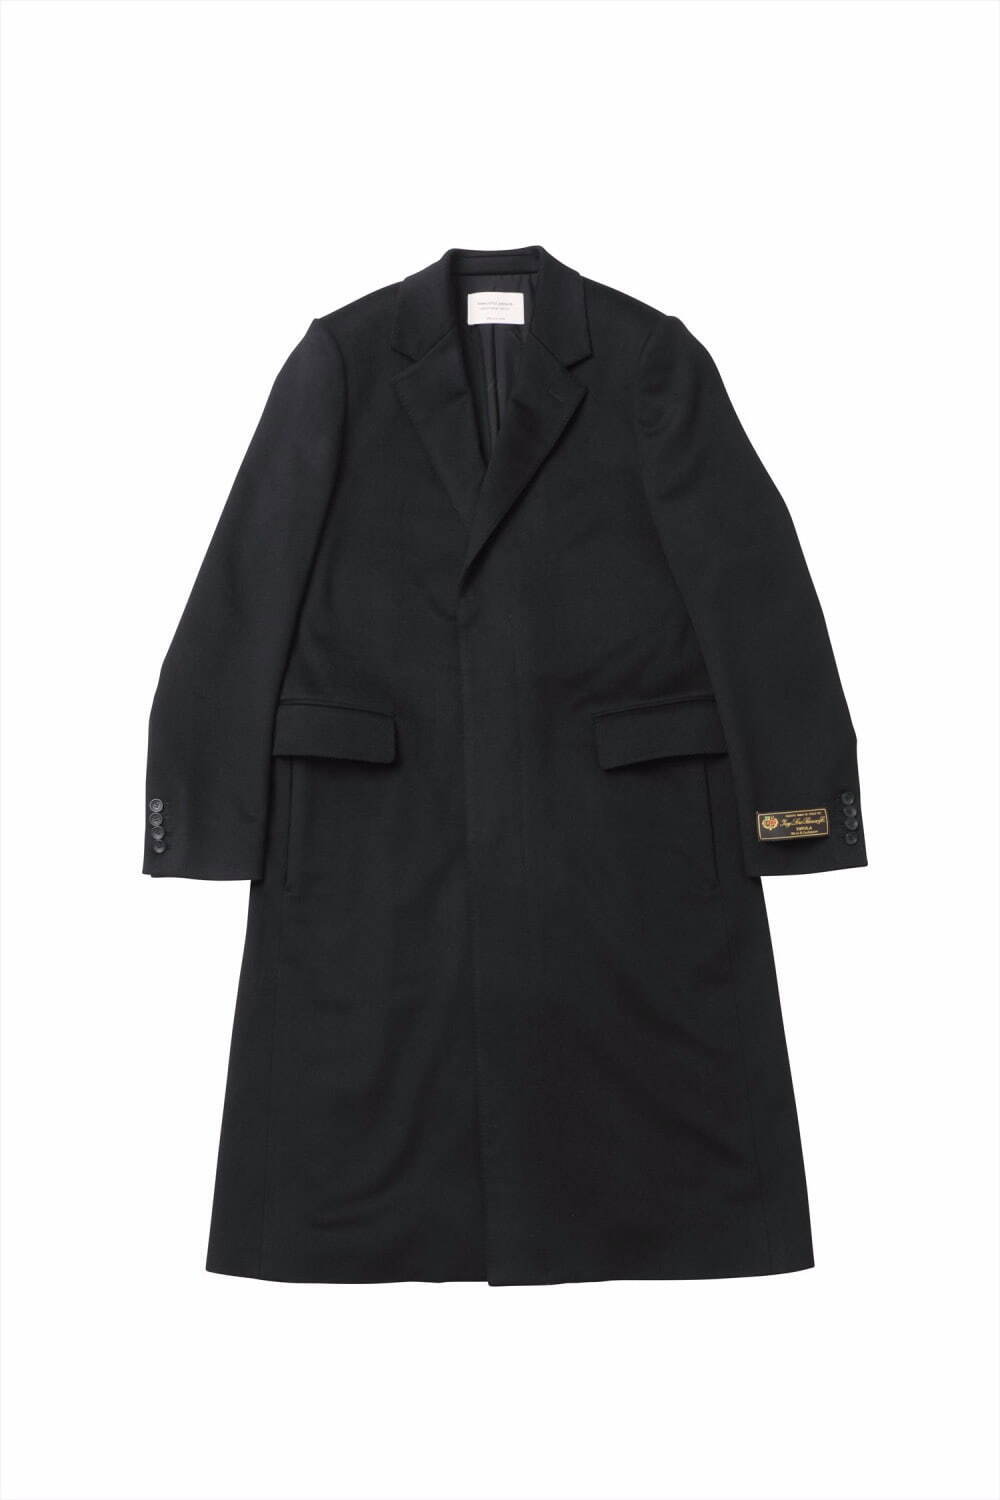 THE / a chester coat 143,000円